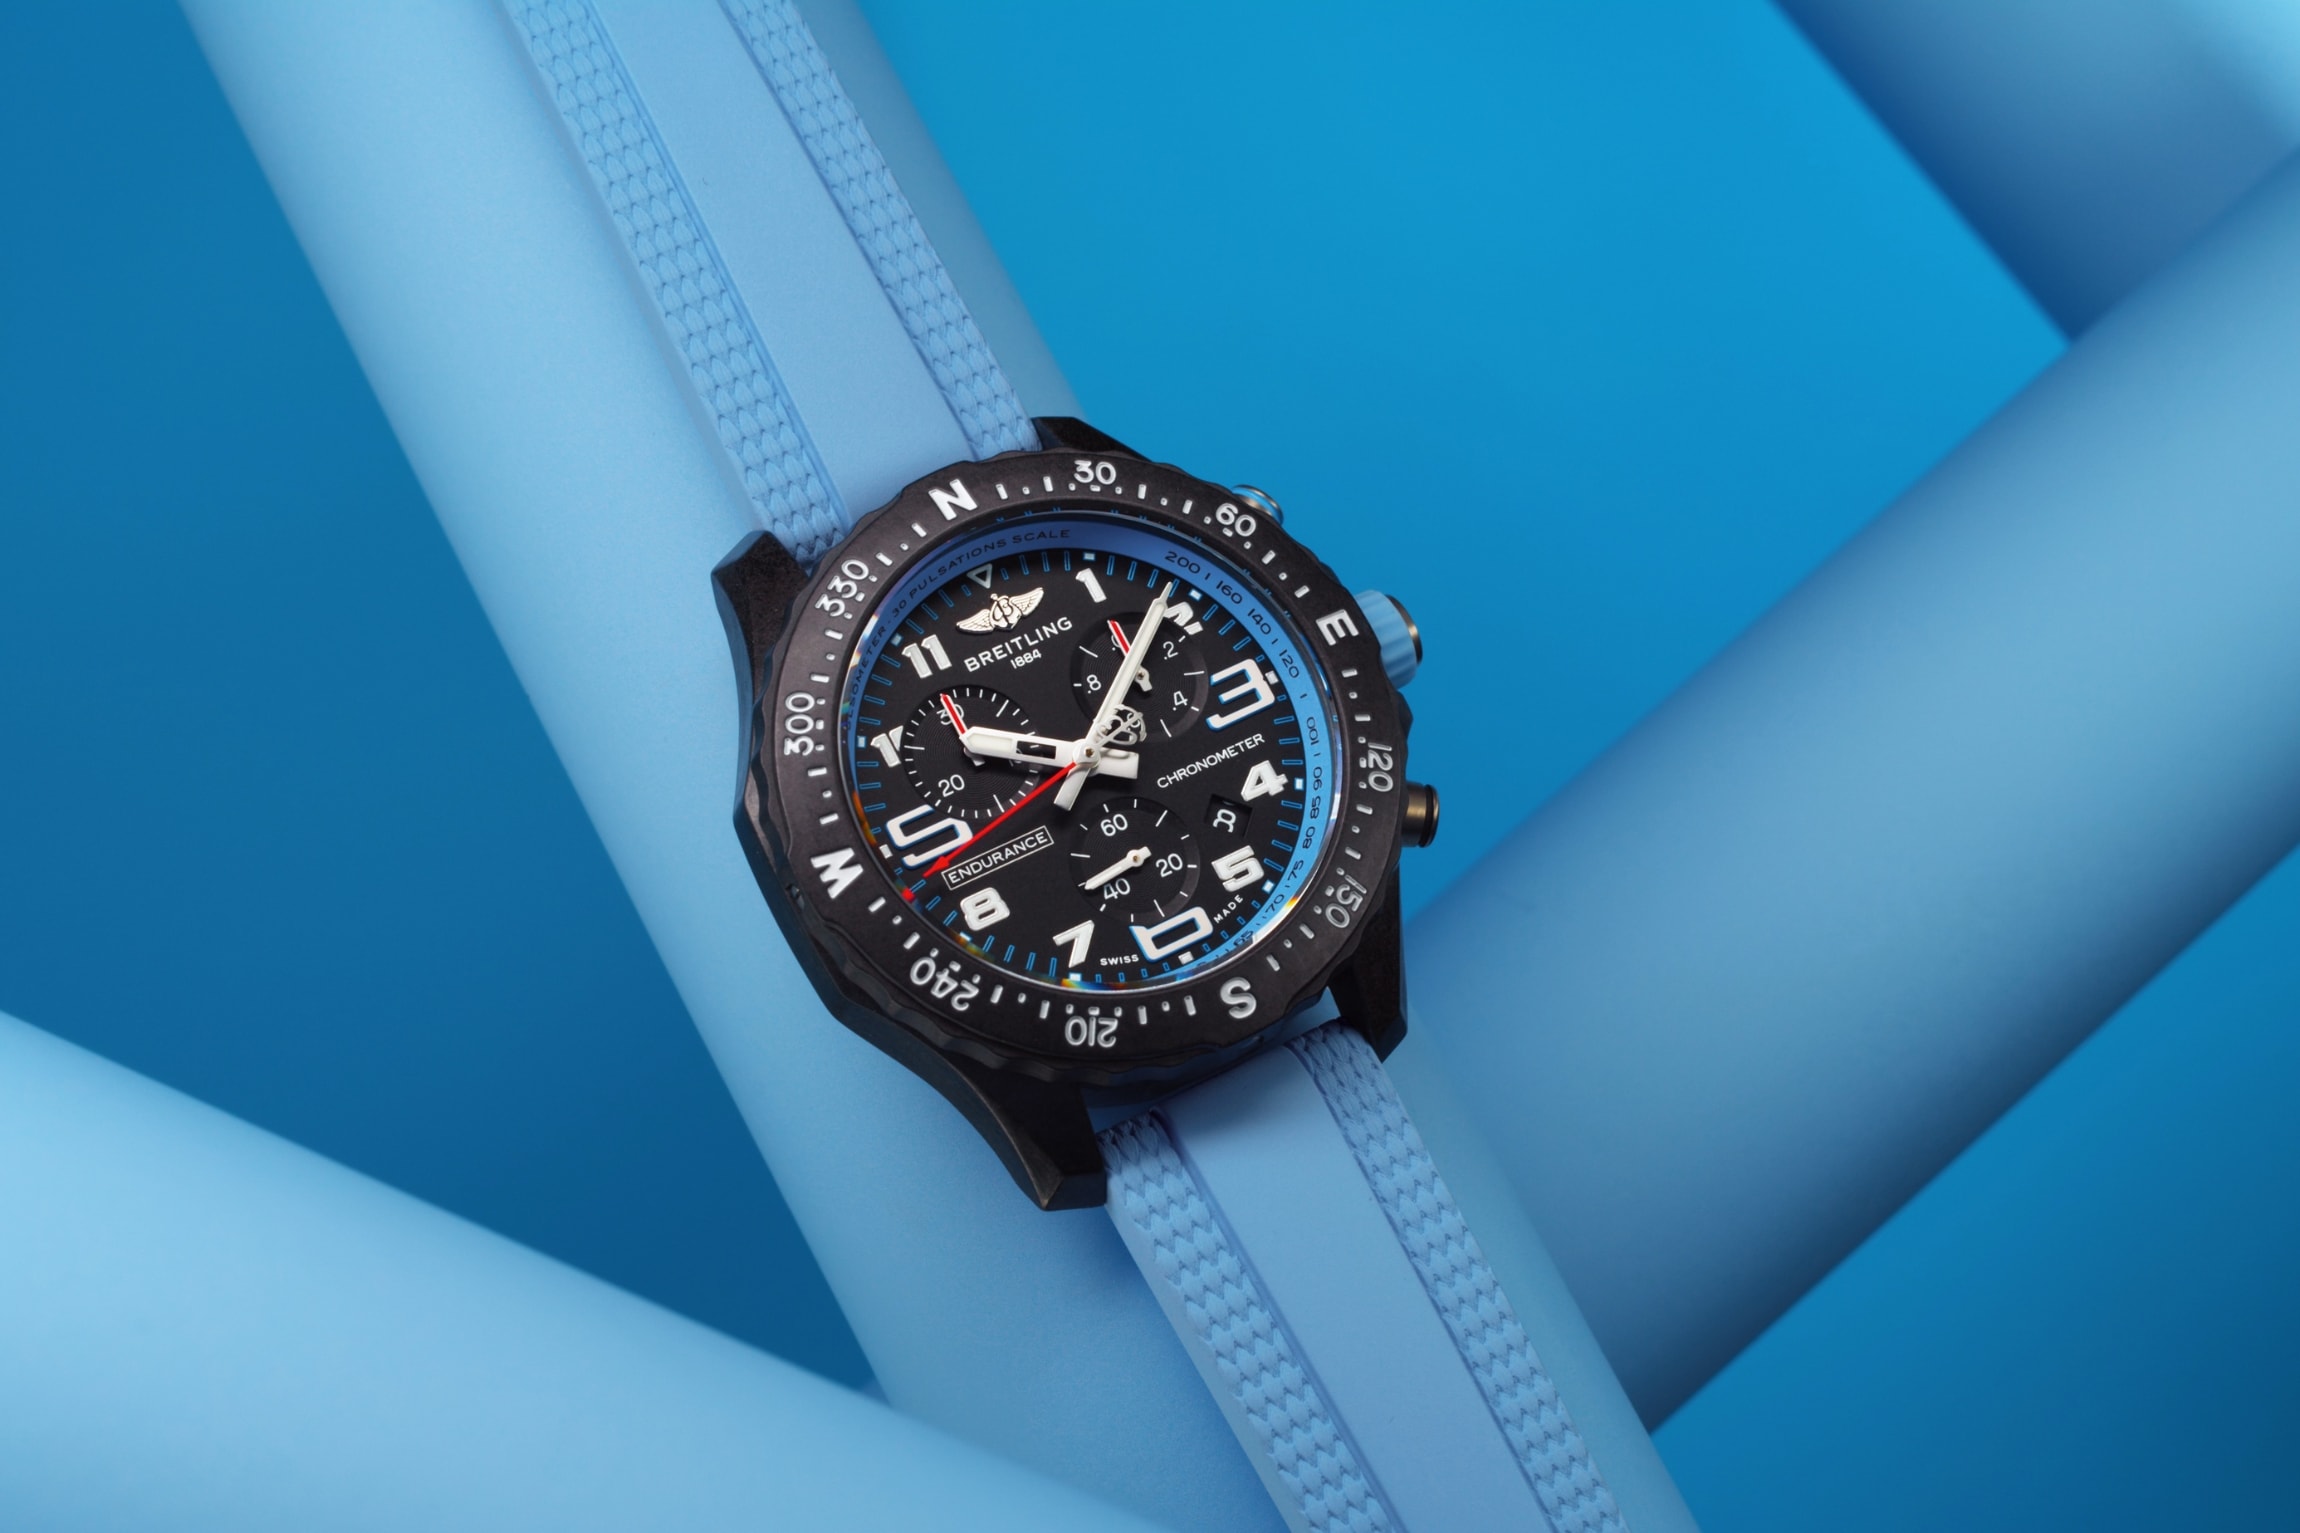 Introducing Breitling Endurance Pro 38